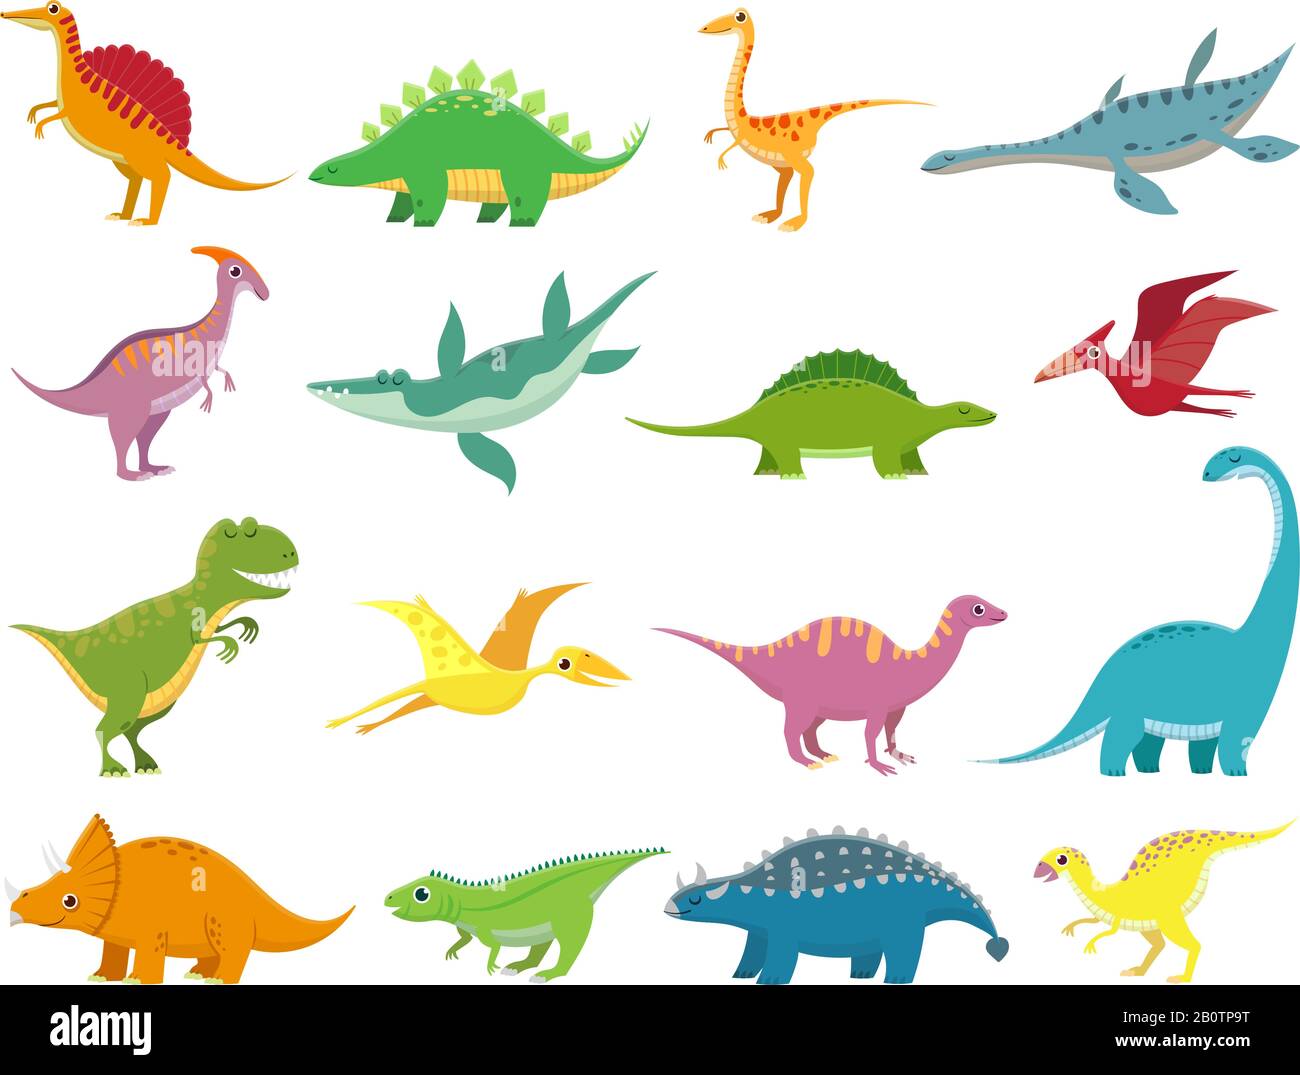 Two funny baby dinosaur characters - brontosaurus and pterodactyloidea,  cartoon vector illustration isolated on white background. Happy smiling  brontosaurus and pterodactyloidea dinosaur characters Stock Vector